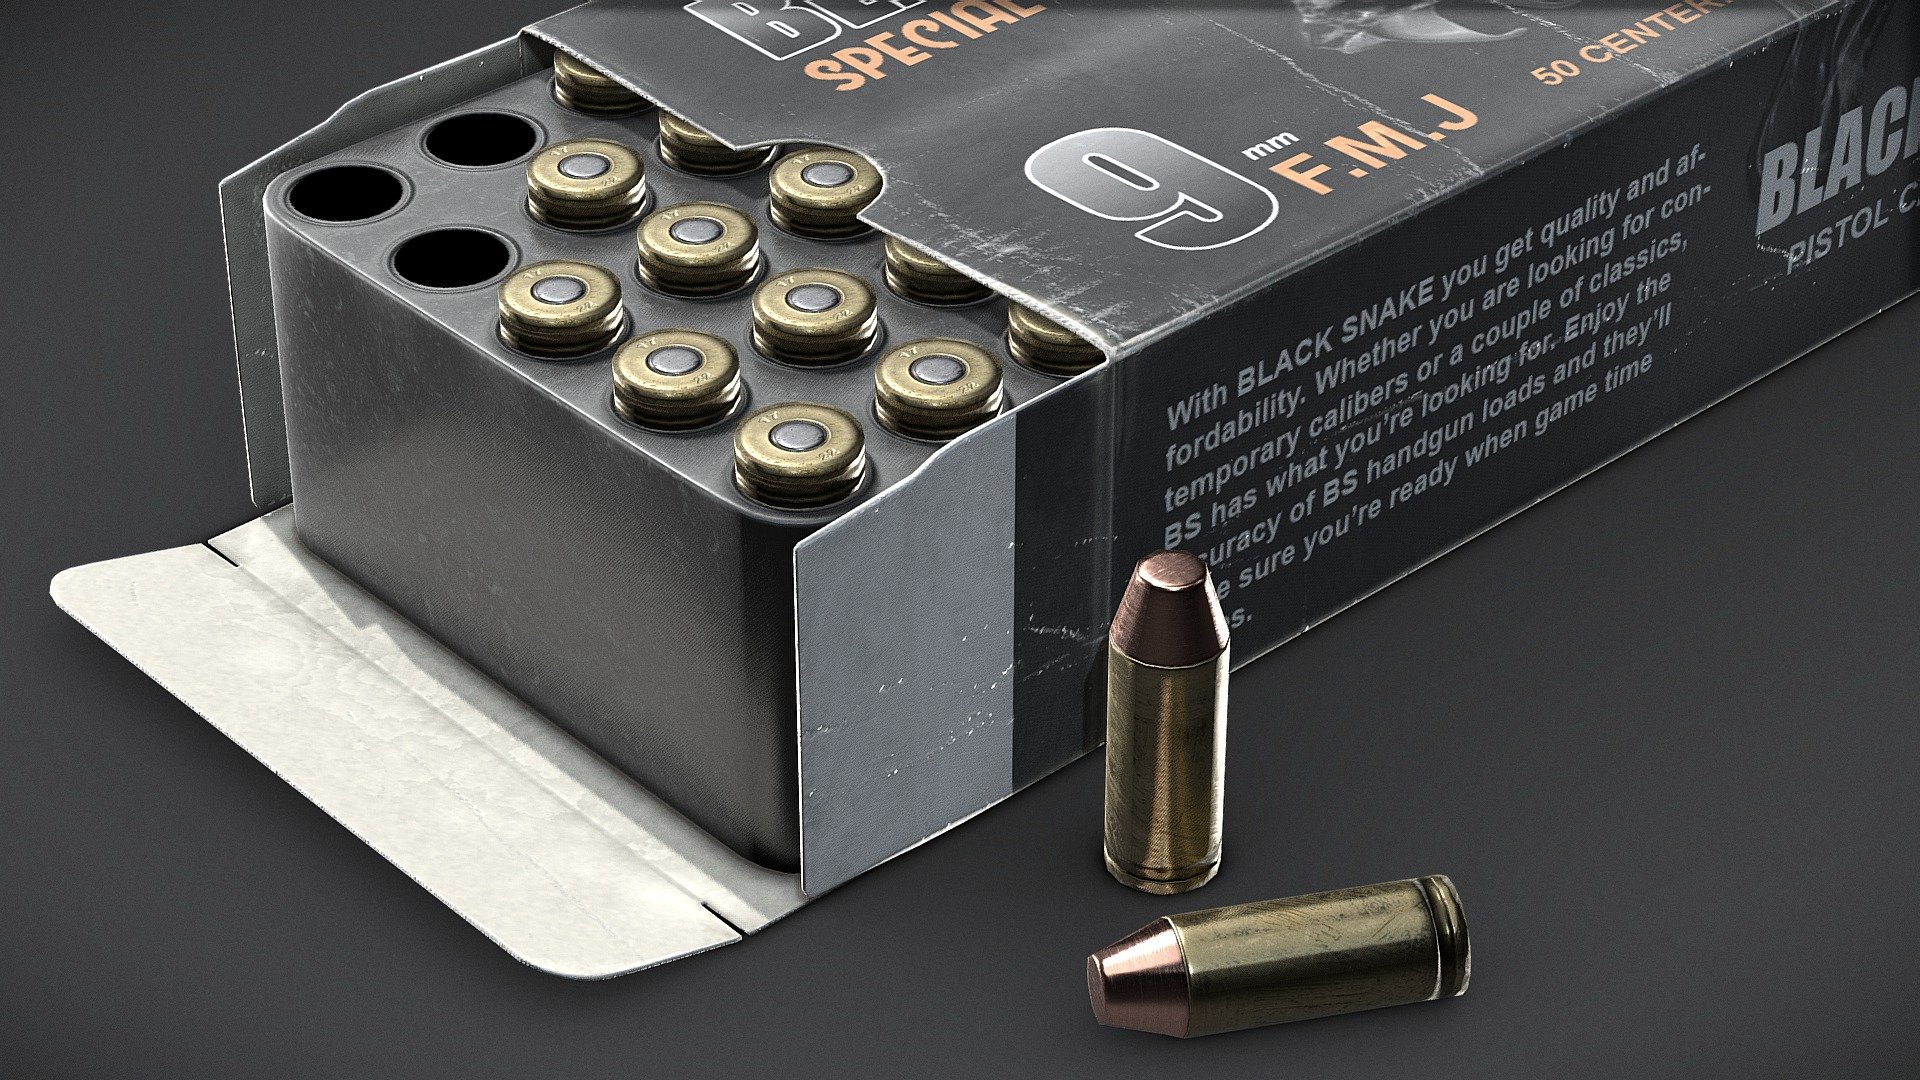 Pistol cartridges ( ammunition pack ) 3D game asset
&hellip;with great attention to detail and rendering.



Designed specifically for game engines and VR and AR - Comes with Unity &amp; Unreal Engine 4 prepared texture sets!
Includes High poly files.


What do you get?

Models:




Pistol cartridges ( ammunition pack ) high-poly models (.fbx)

Pistol cartridges ( ammunition pack ) low-poly models (.obj, .fbx)




Bullet / Cartridge 76 tris

Box Insert 76 tris

Cartboard box 568 tris

Opened pistol cartridges cartboard box with insert 2182 tris

Unity Standard Shader textures :




Albedo 2048x2048

Normal 2048x2048

Specular 2048x2048

Ambient Oclussion 2048x2048

UE4 textures :




Albedo 2048x2048

Normal 2048x2048

RMA (channel packed texture) 2048x2048



Feel free to contact me via PM. Happy shopping, .MG


VR / AR / Low-poly / Game ready / Pistol cartridges ( ammunition pack ) 3D MODEL - Pistol cartridges (ammunition) - PBR Game Ready - Buy Royalty Free 3D model by miloszgierczak 3d model